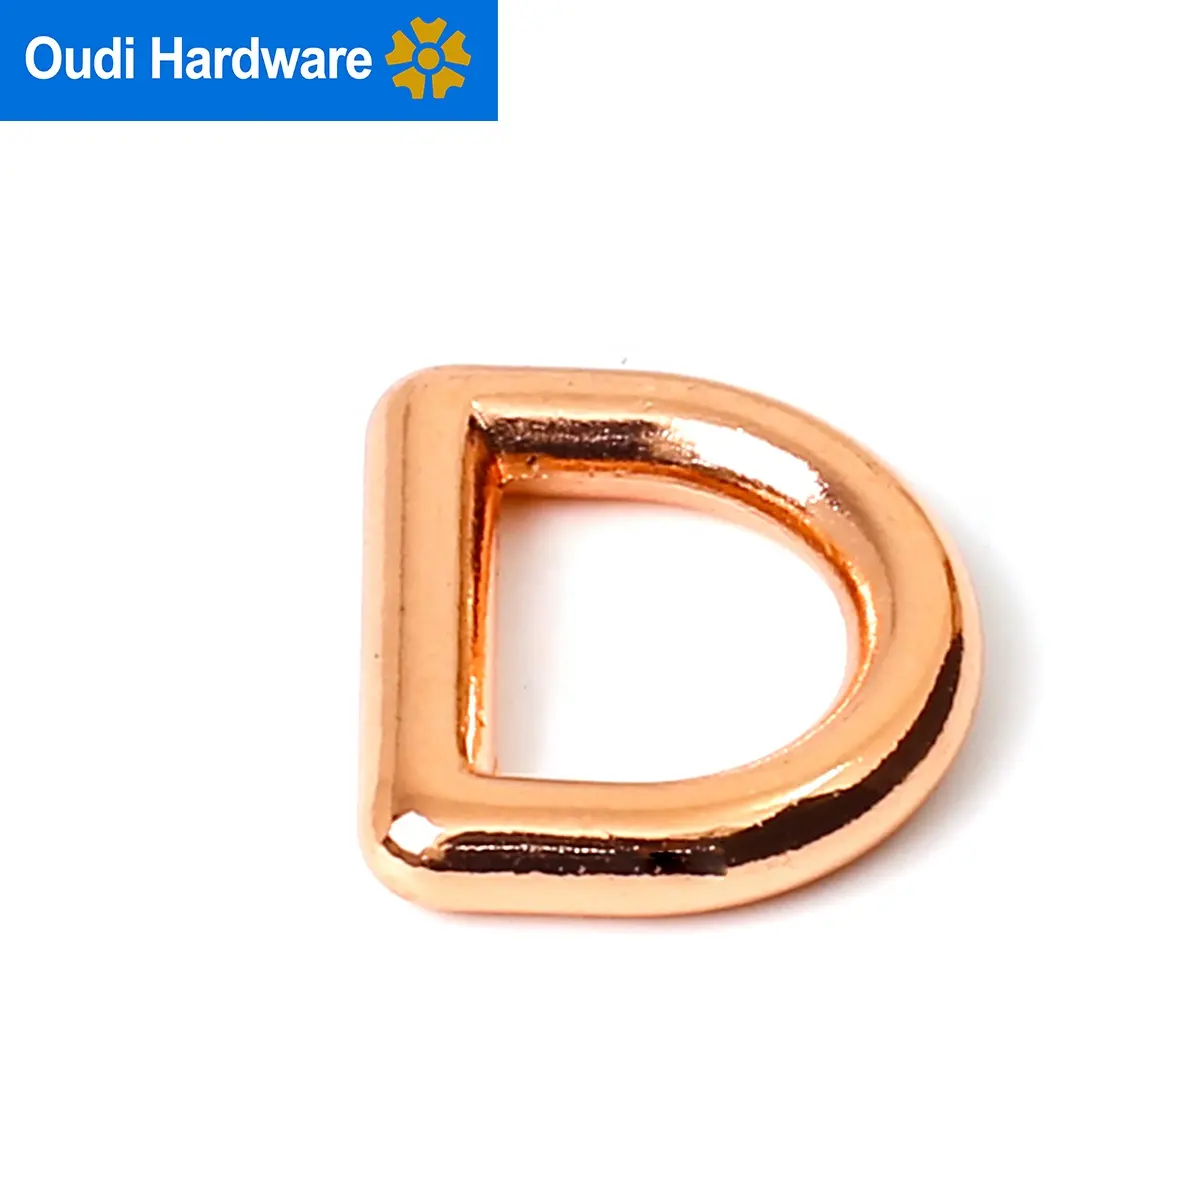 Custom D ring Hardware Zinc Alloy Metal D Ring For Dog Collar Rose Gold D Ring Buckle 1 Inch Size